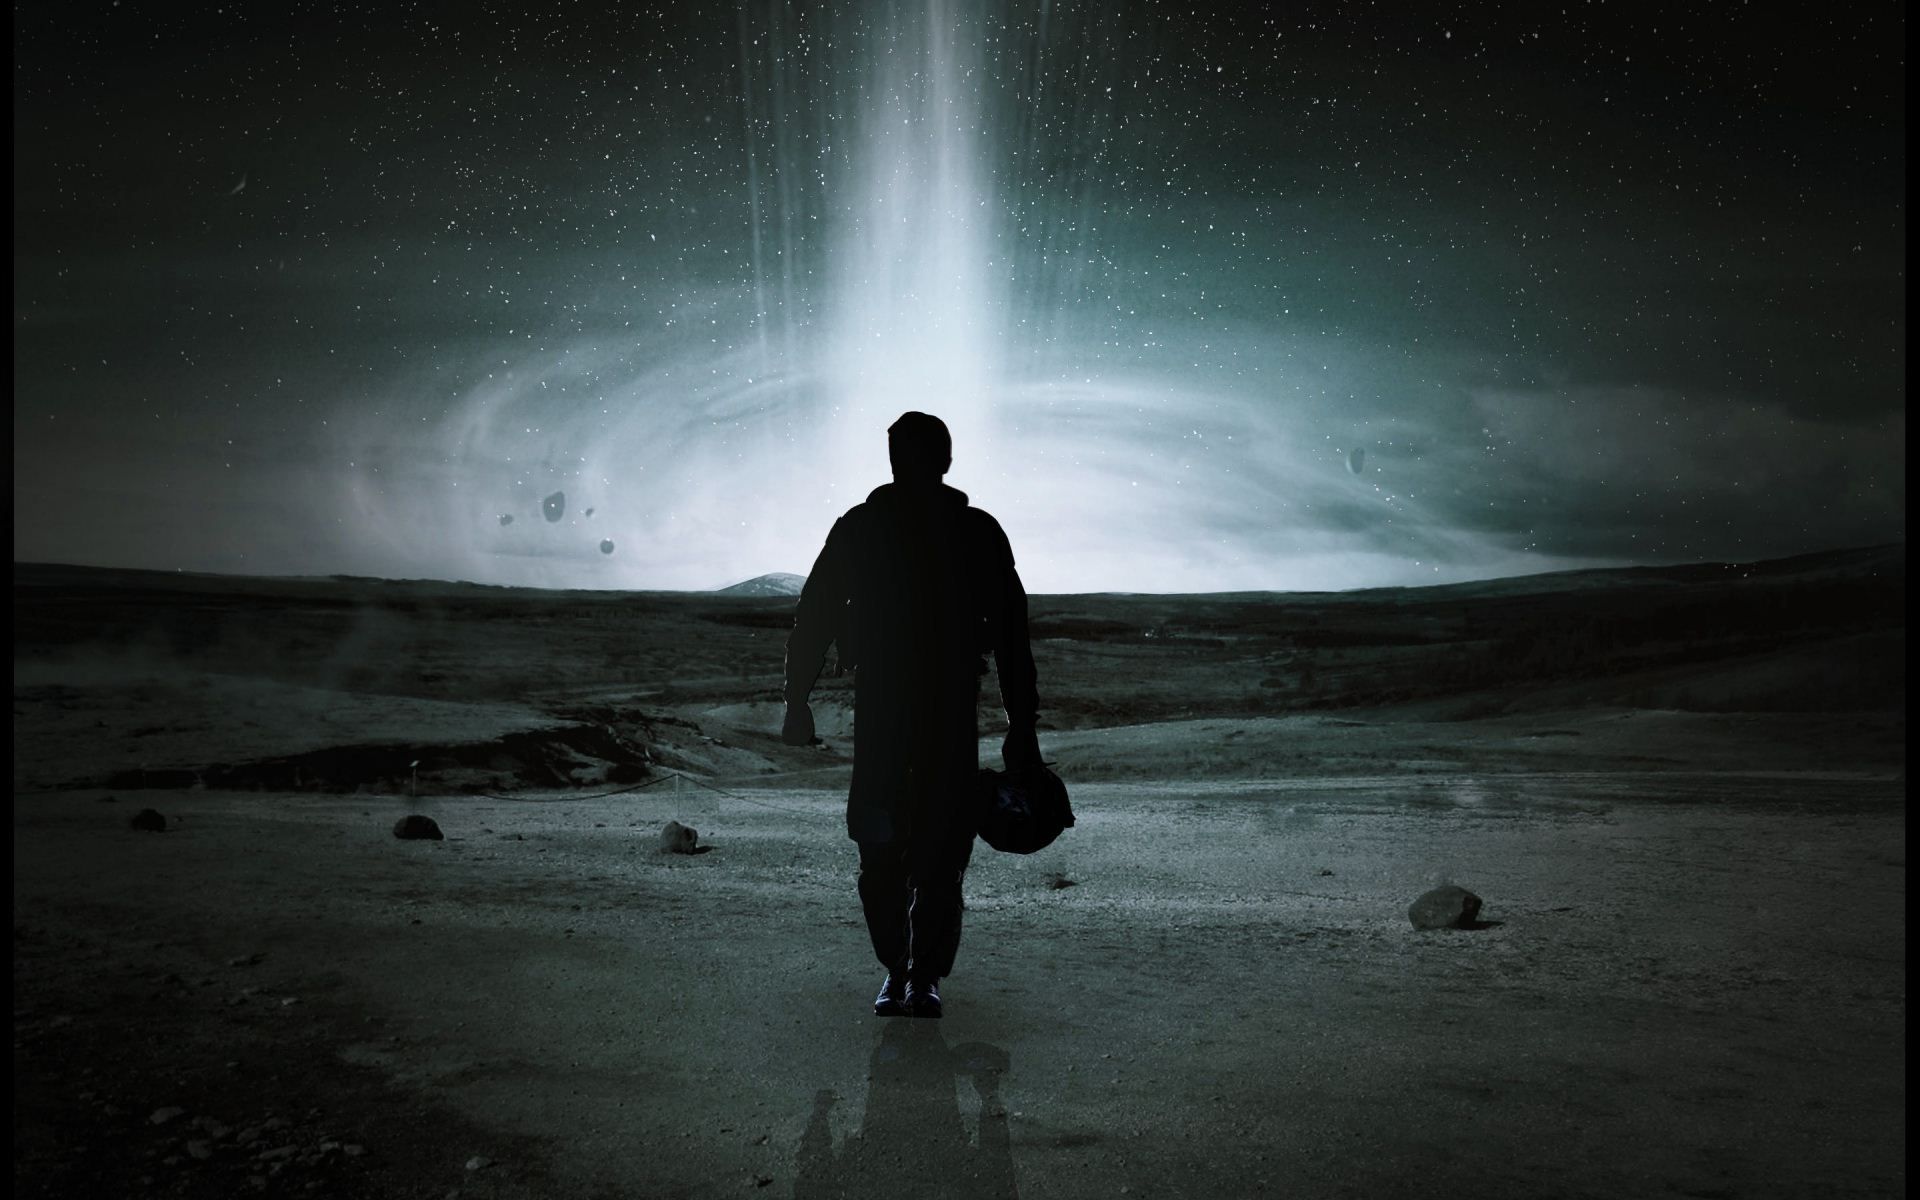 Christopher Nolan Interstellar 2014 Movie Wallpaper ⋆ BYT // Brightest Young Things